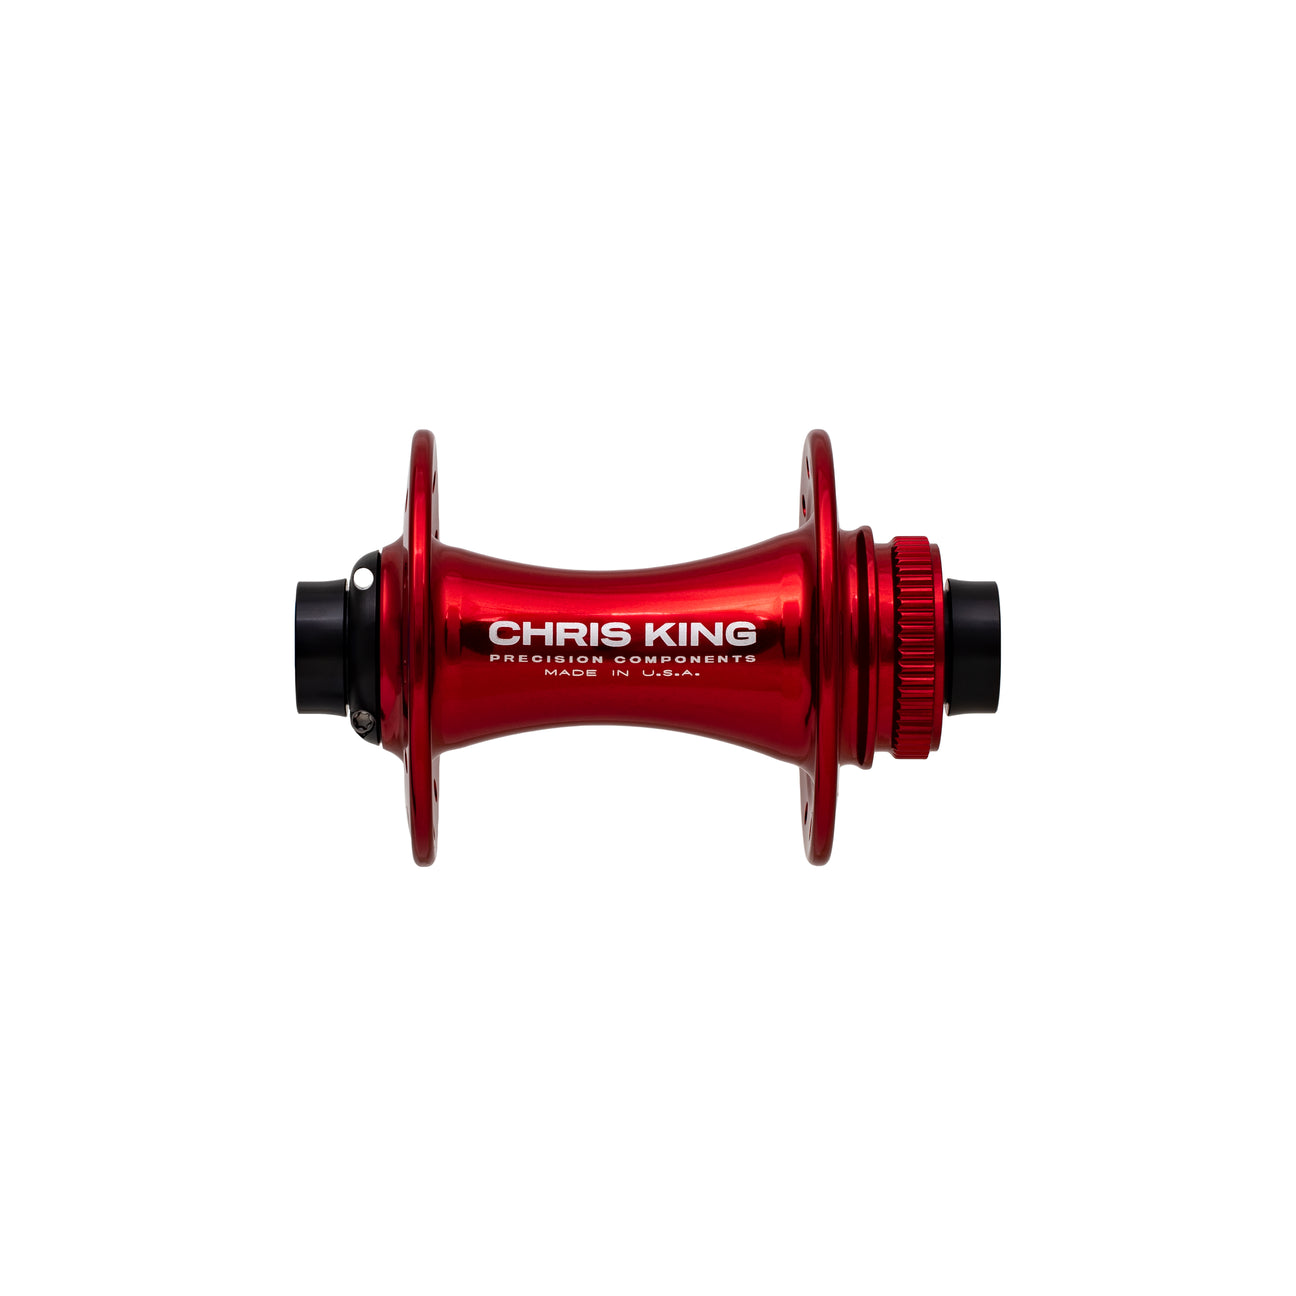 Chris King boost front hub in red